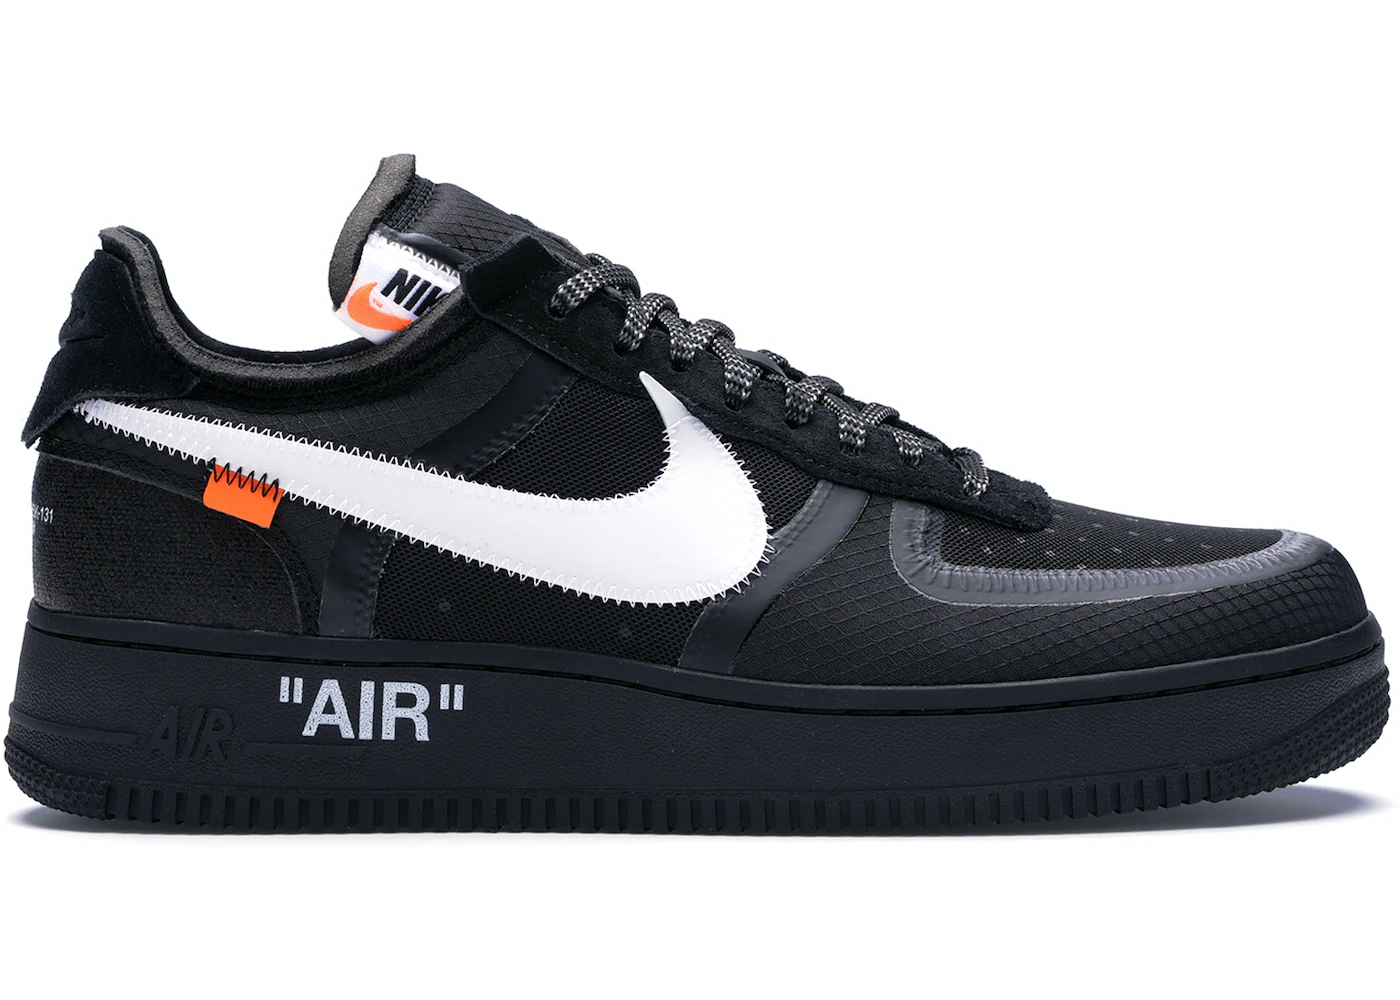 Asian Pedestrian Biggest Nike Air Force 1 Low Off-White Black White Men's - AO4606-001 - US